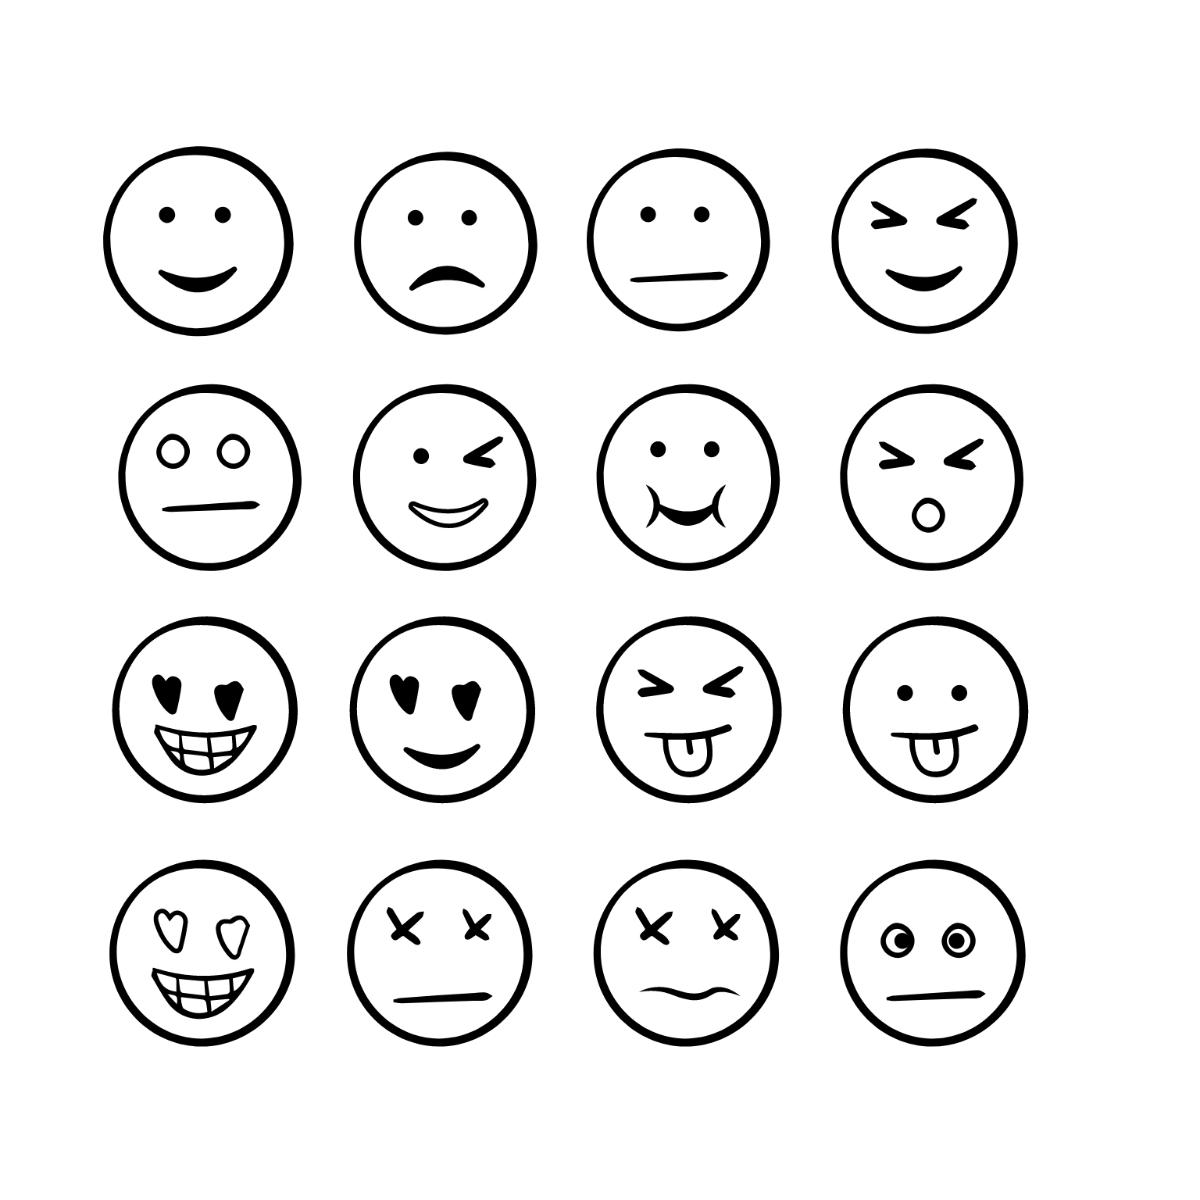 FREE Smiley Vector Templates & Examples - Edit Online & Download ...